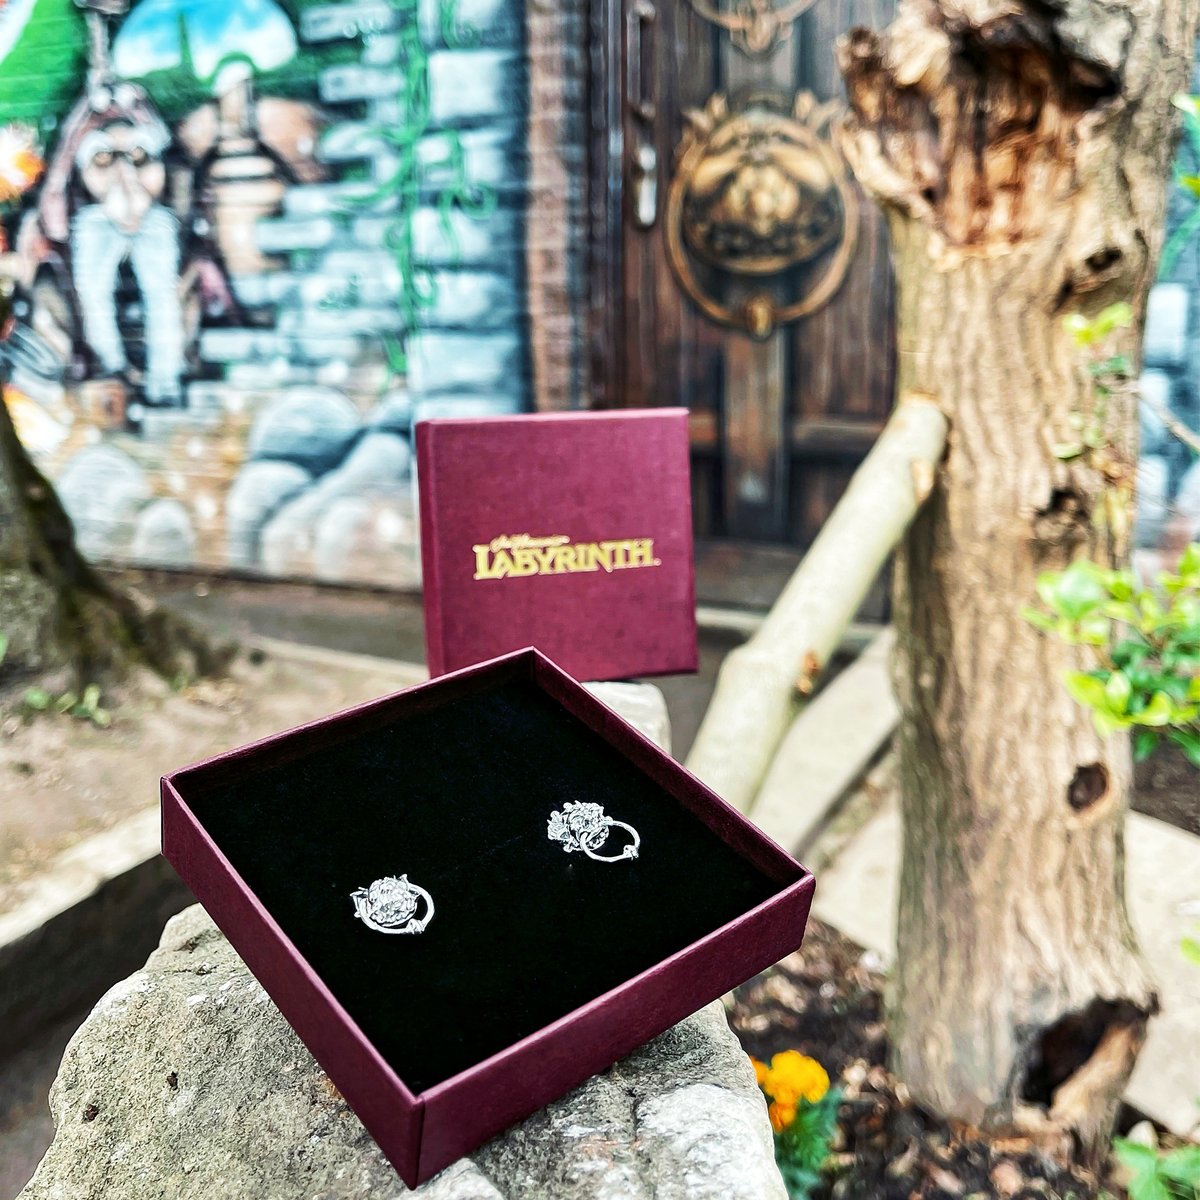 These handmade door knocker earrings are the perfect attire for your own magic dance inspired by the magical movie #Labyrinth from @LicensedToCharm bit.ly/3bMKuq5 #JimHensonCompany